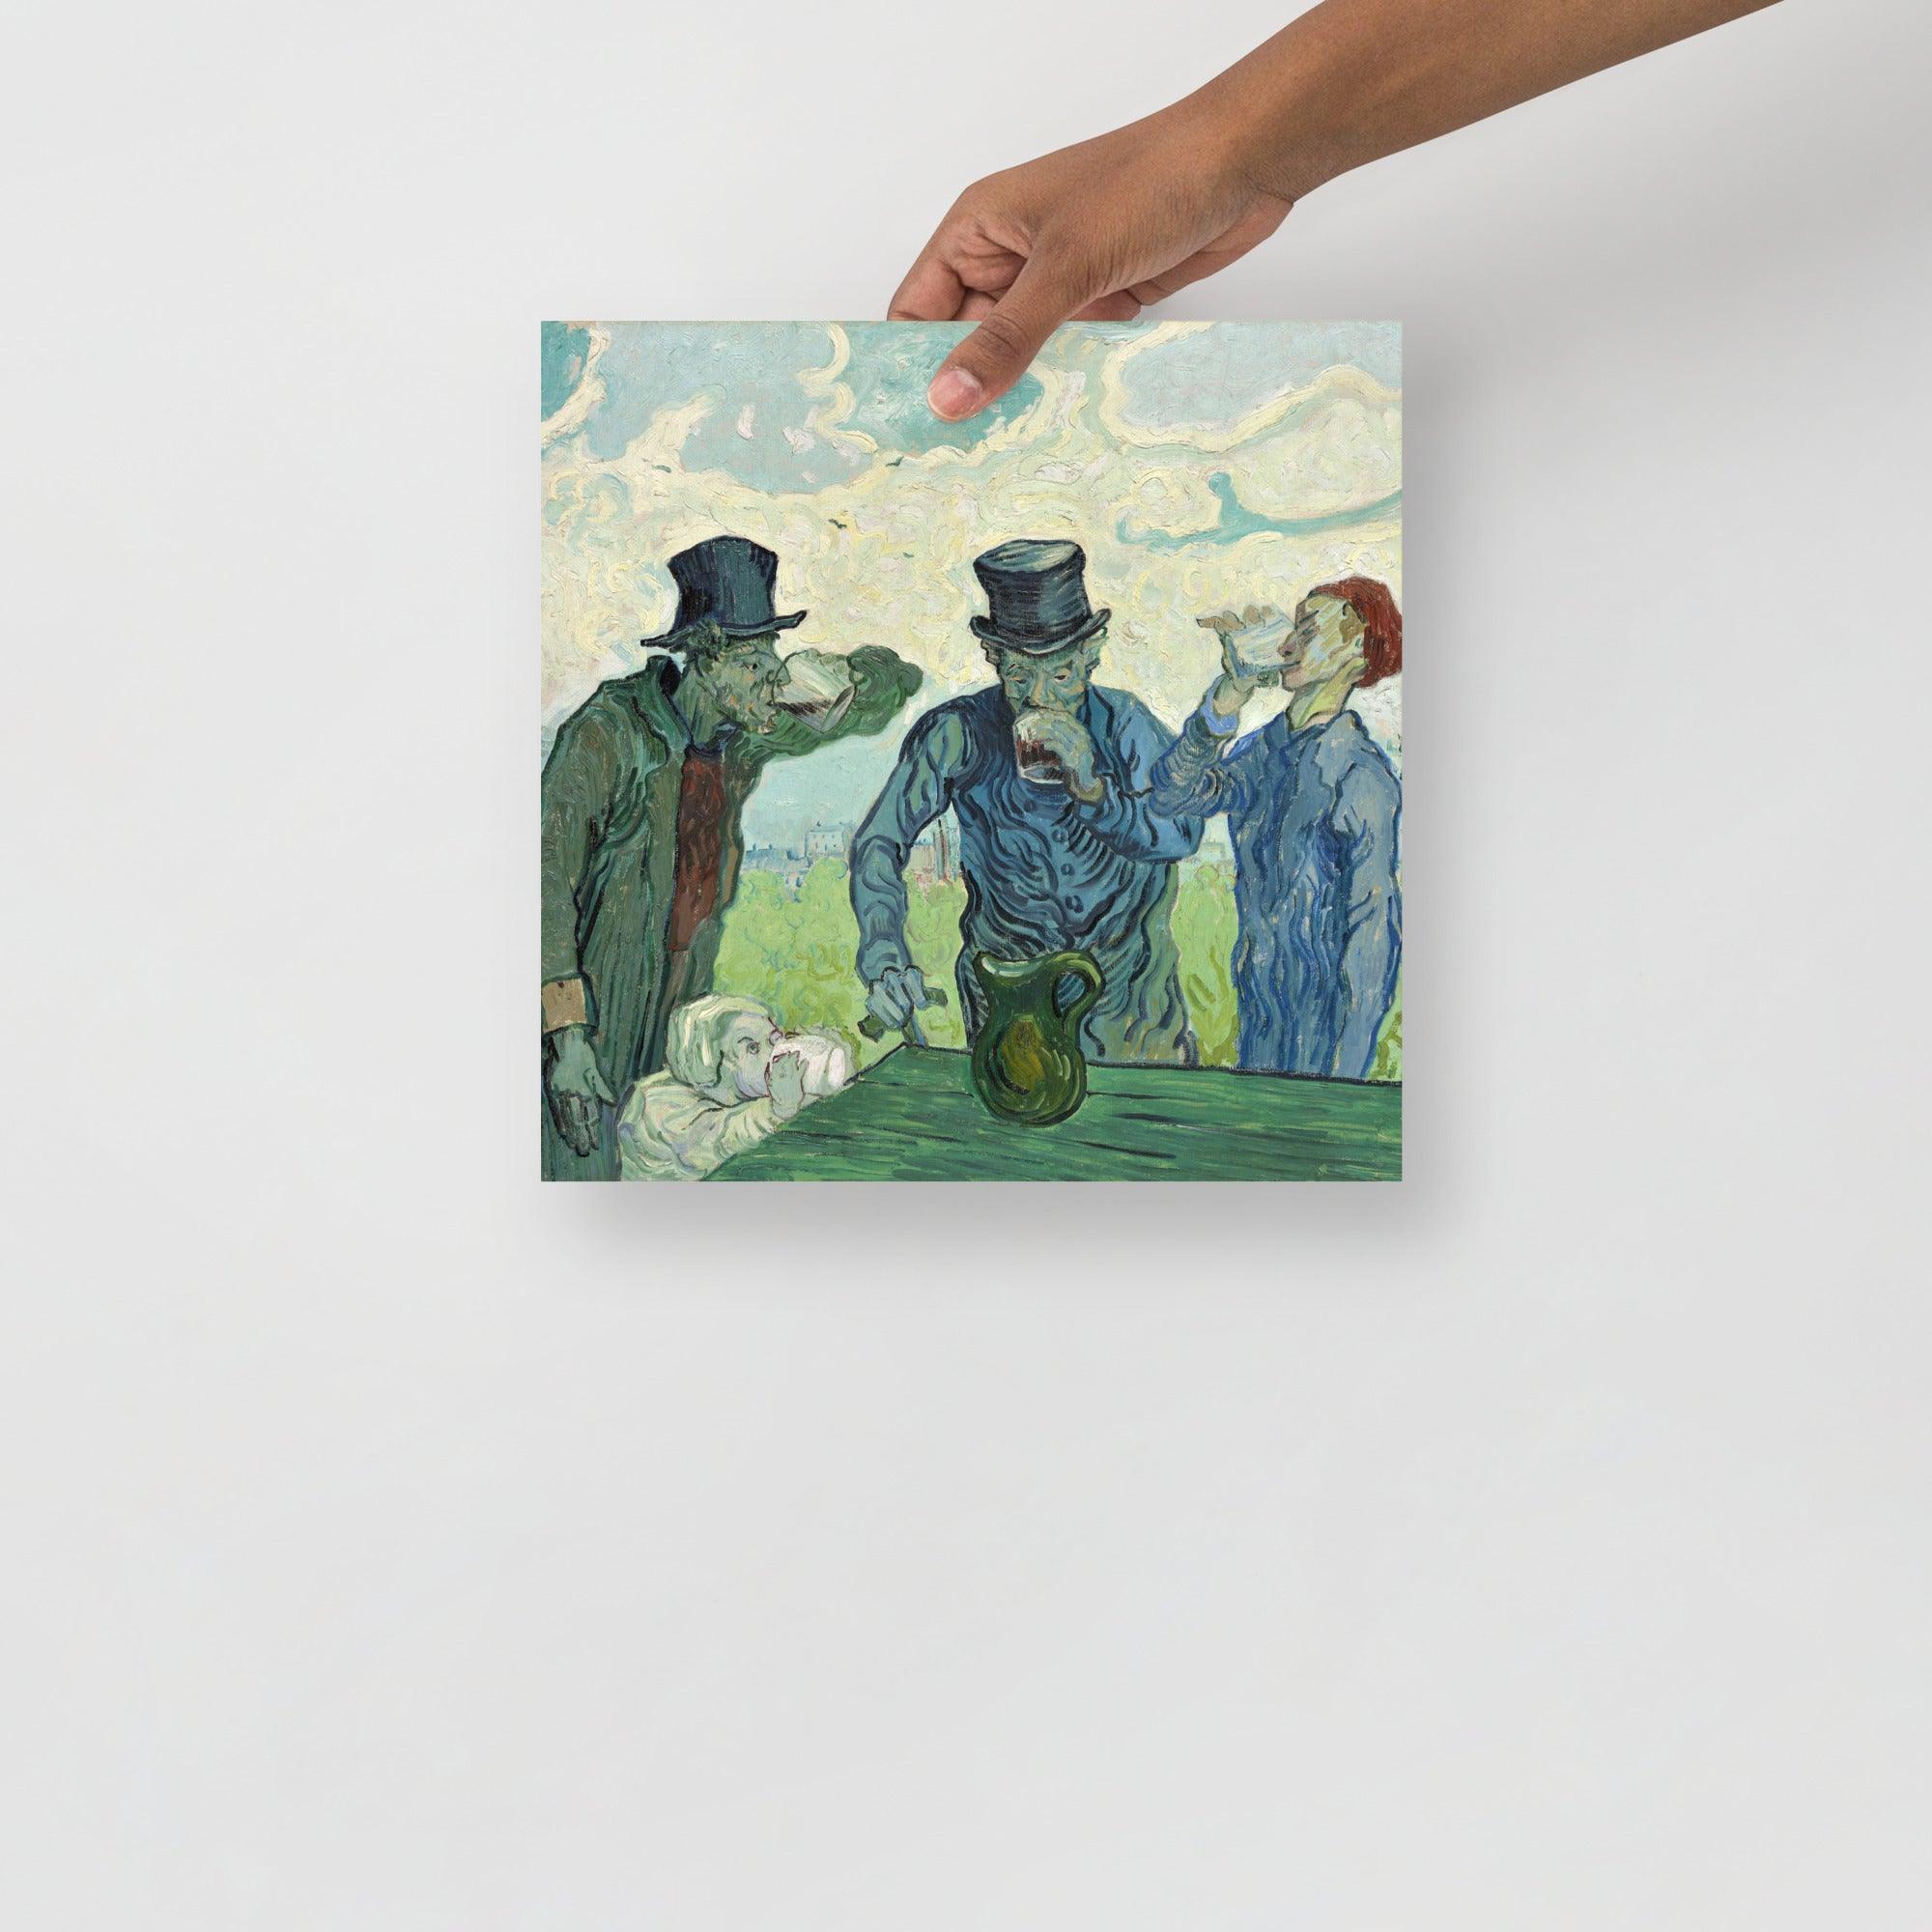 The Drinkers by Vincent Van Gogh poster on a plain backdrop in size 12x12”.